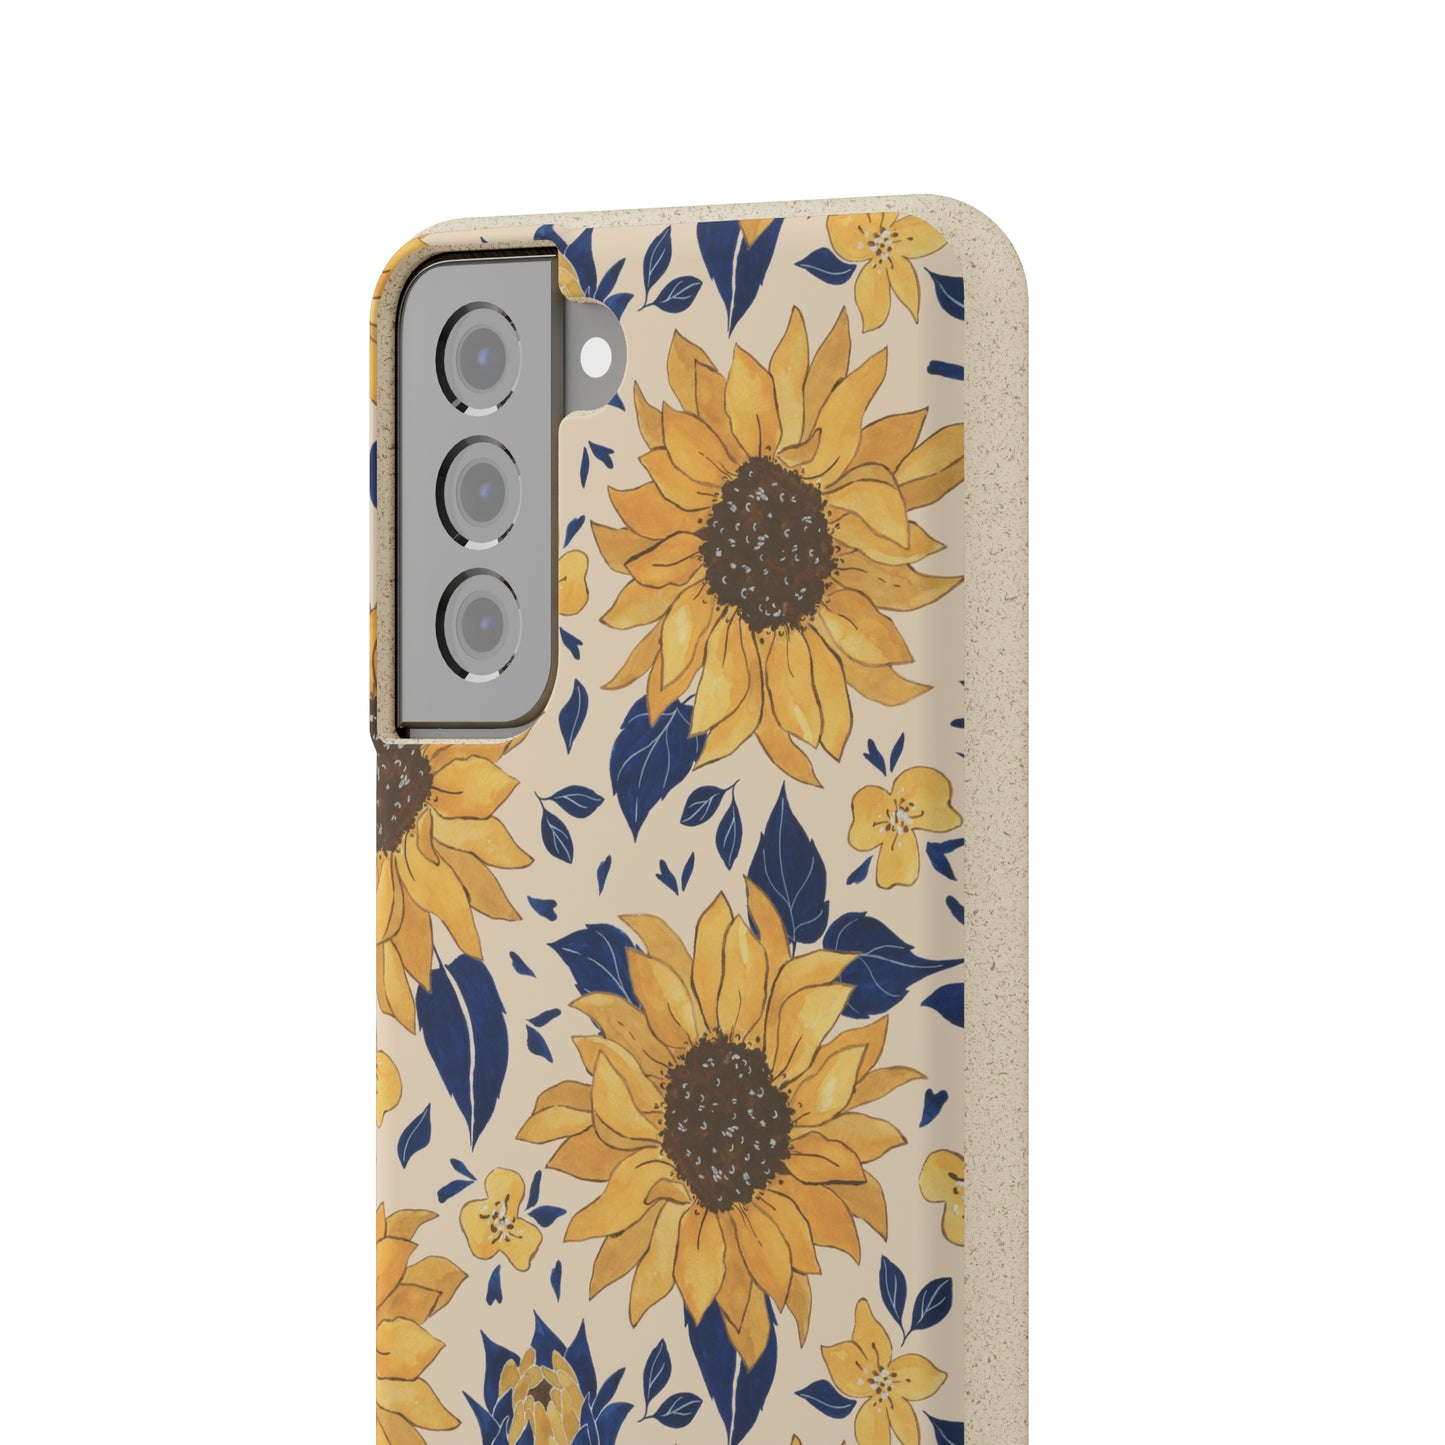 Sunflower Glow | Protective Biodegradable